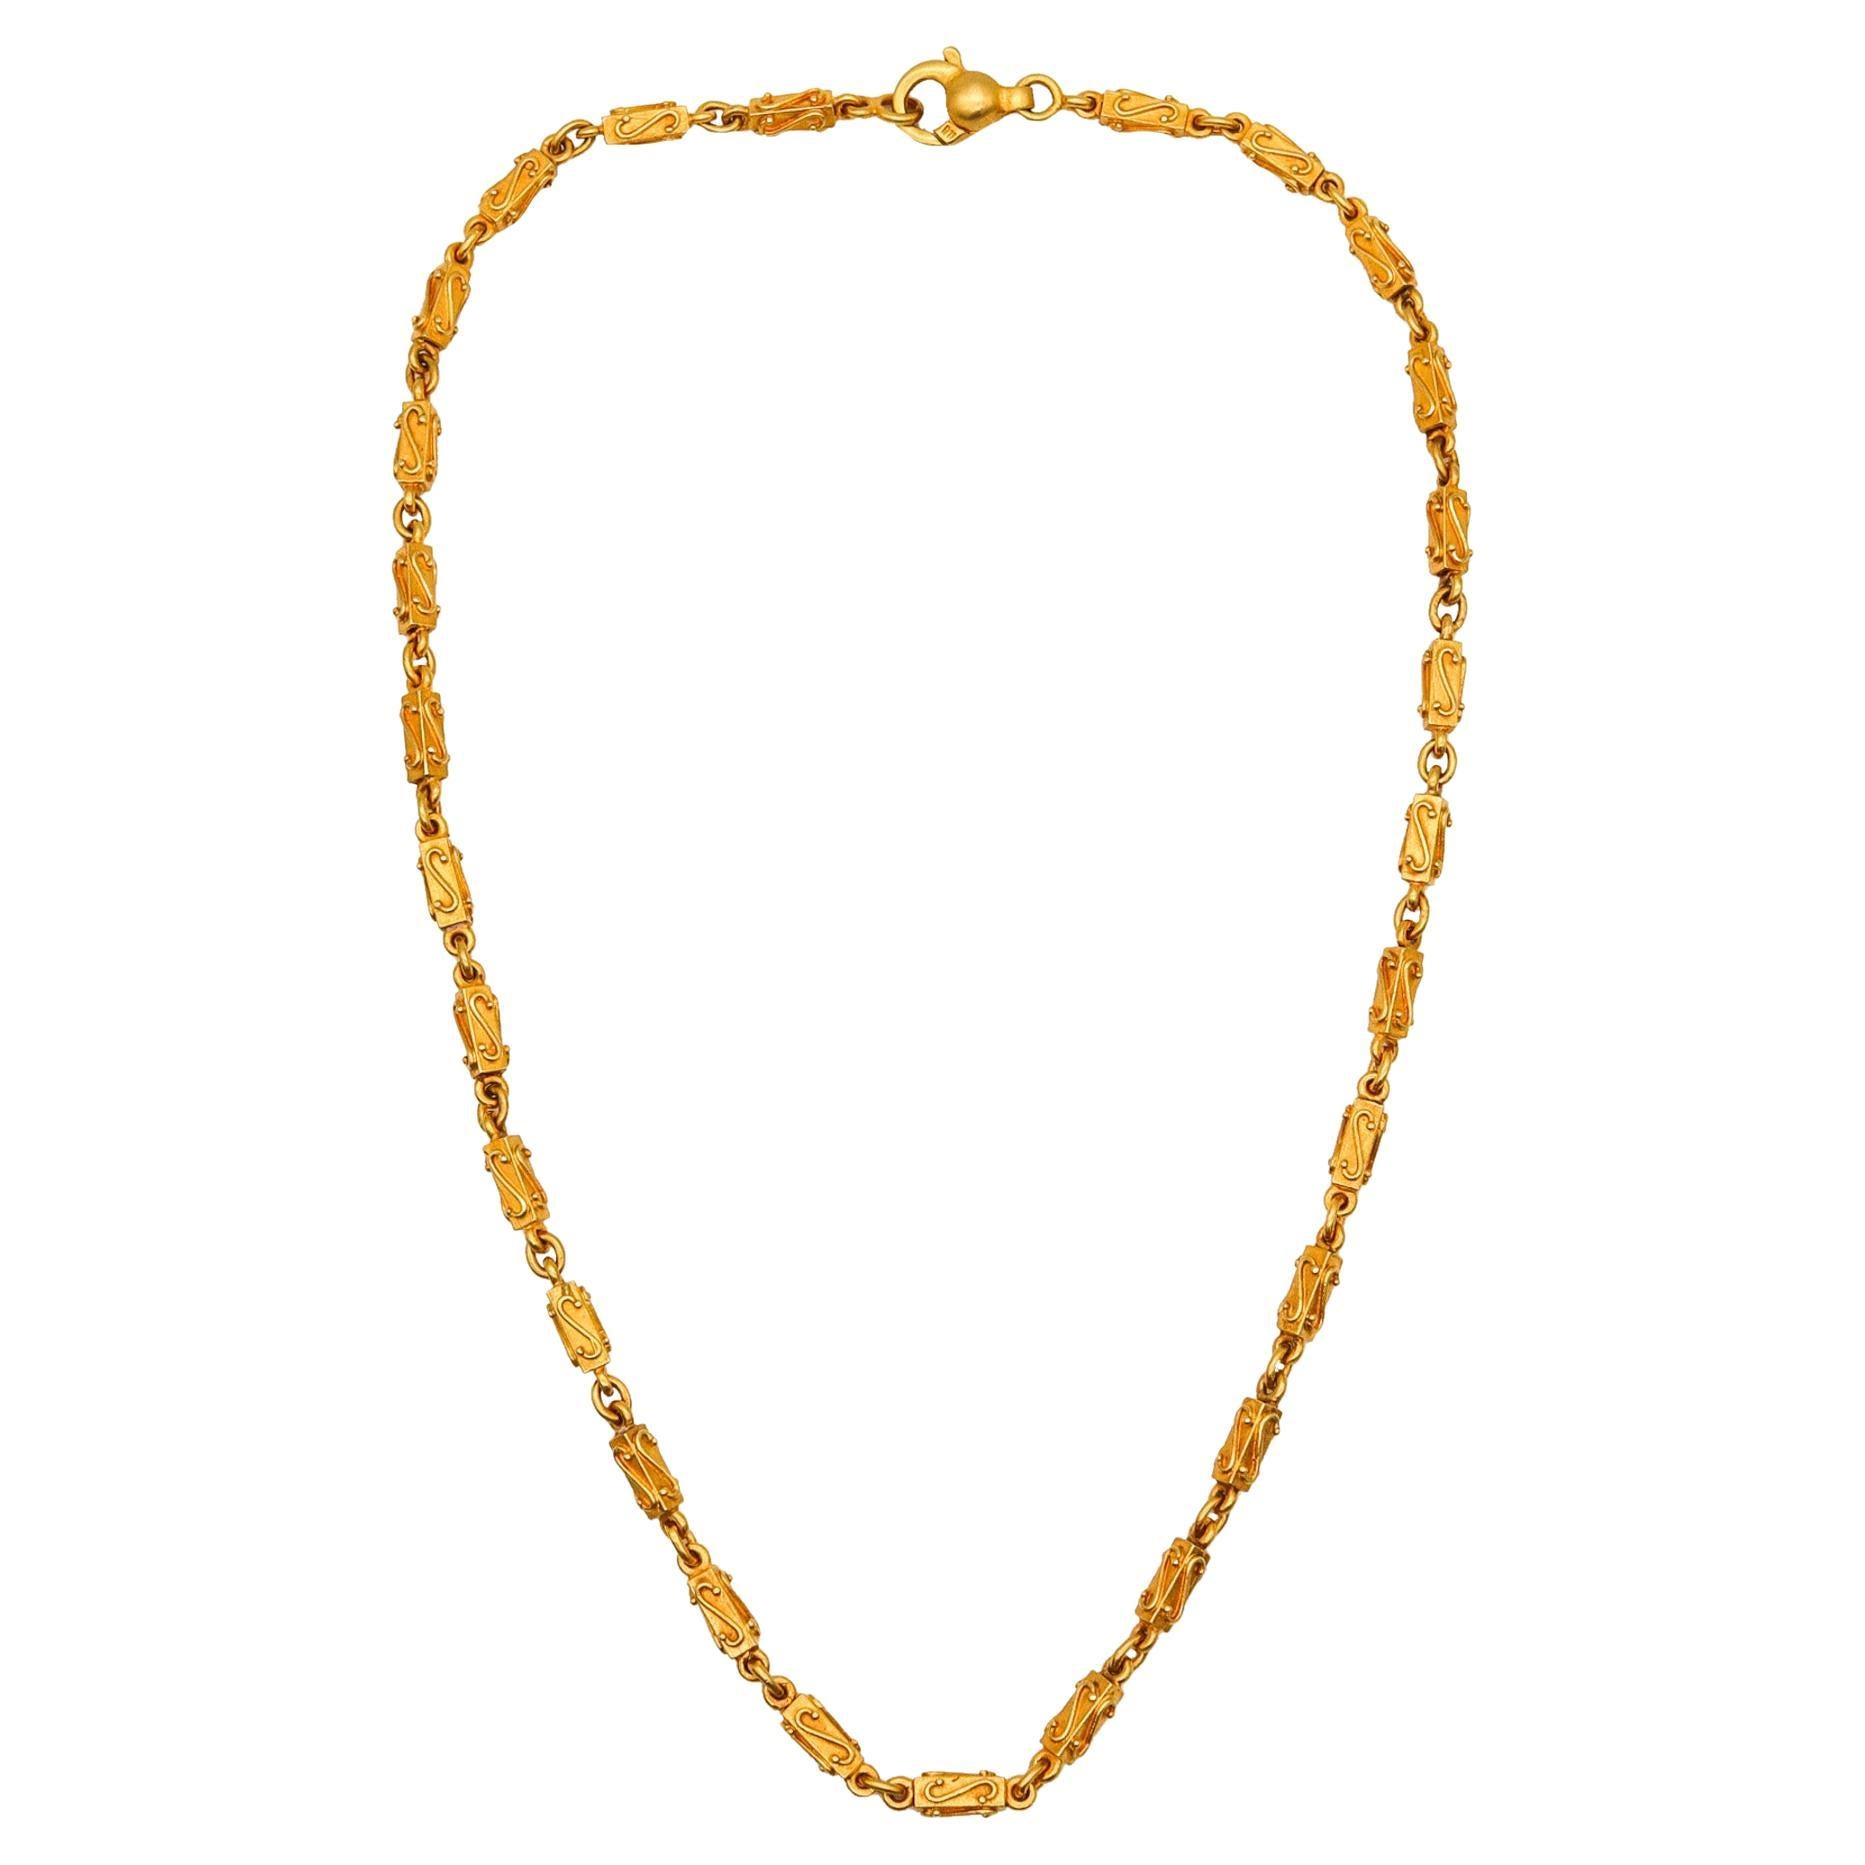 Etruscan Revival Vintage Italian Bold Chain Necklace in Solid 18Kt Yellow Gold For Sale